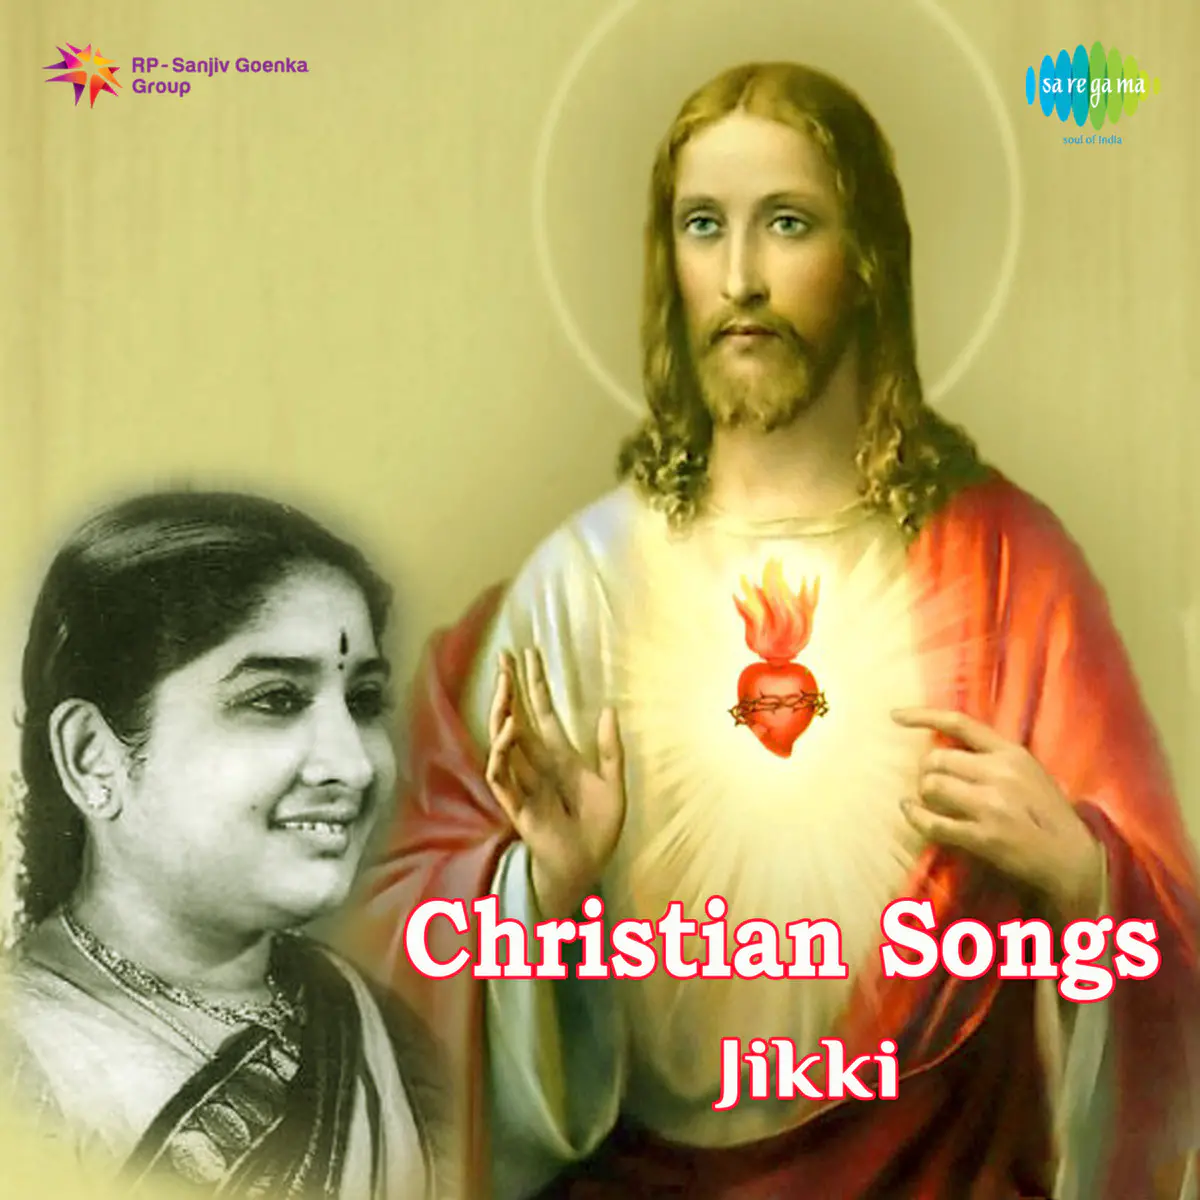 Christian Songs Tamil Songs Download Christian Songs Tamil Mp3 Tamil Songs Online Free On Gaana Com